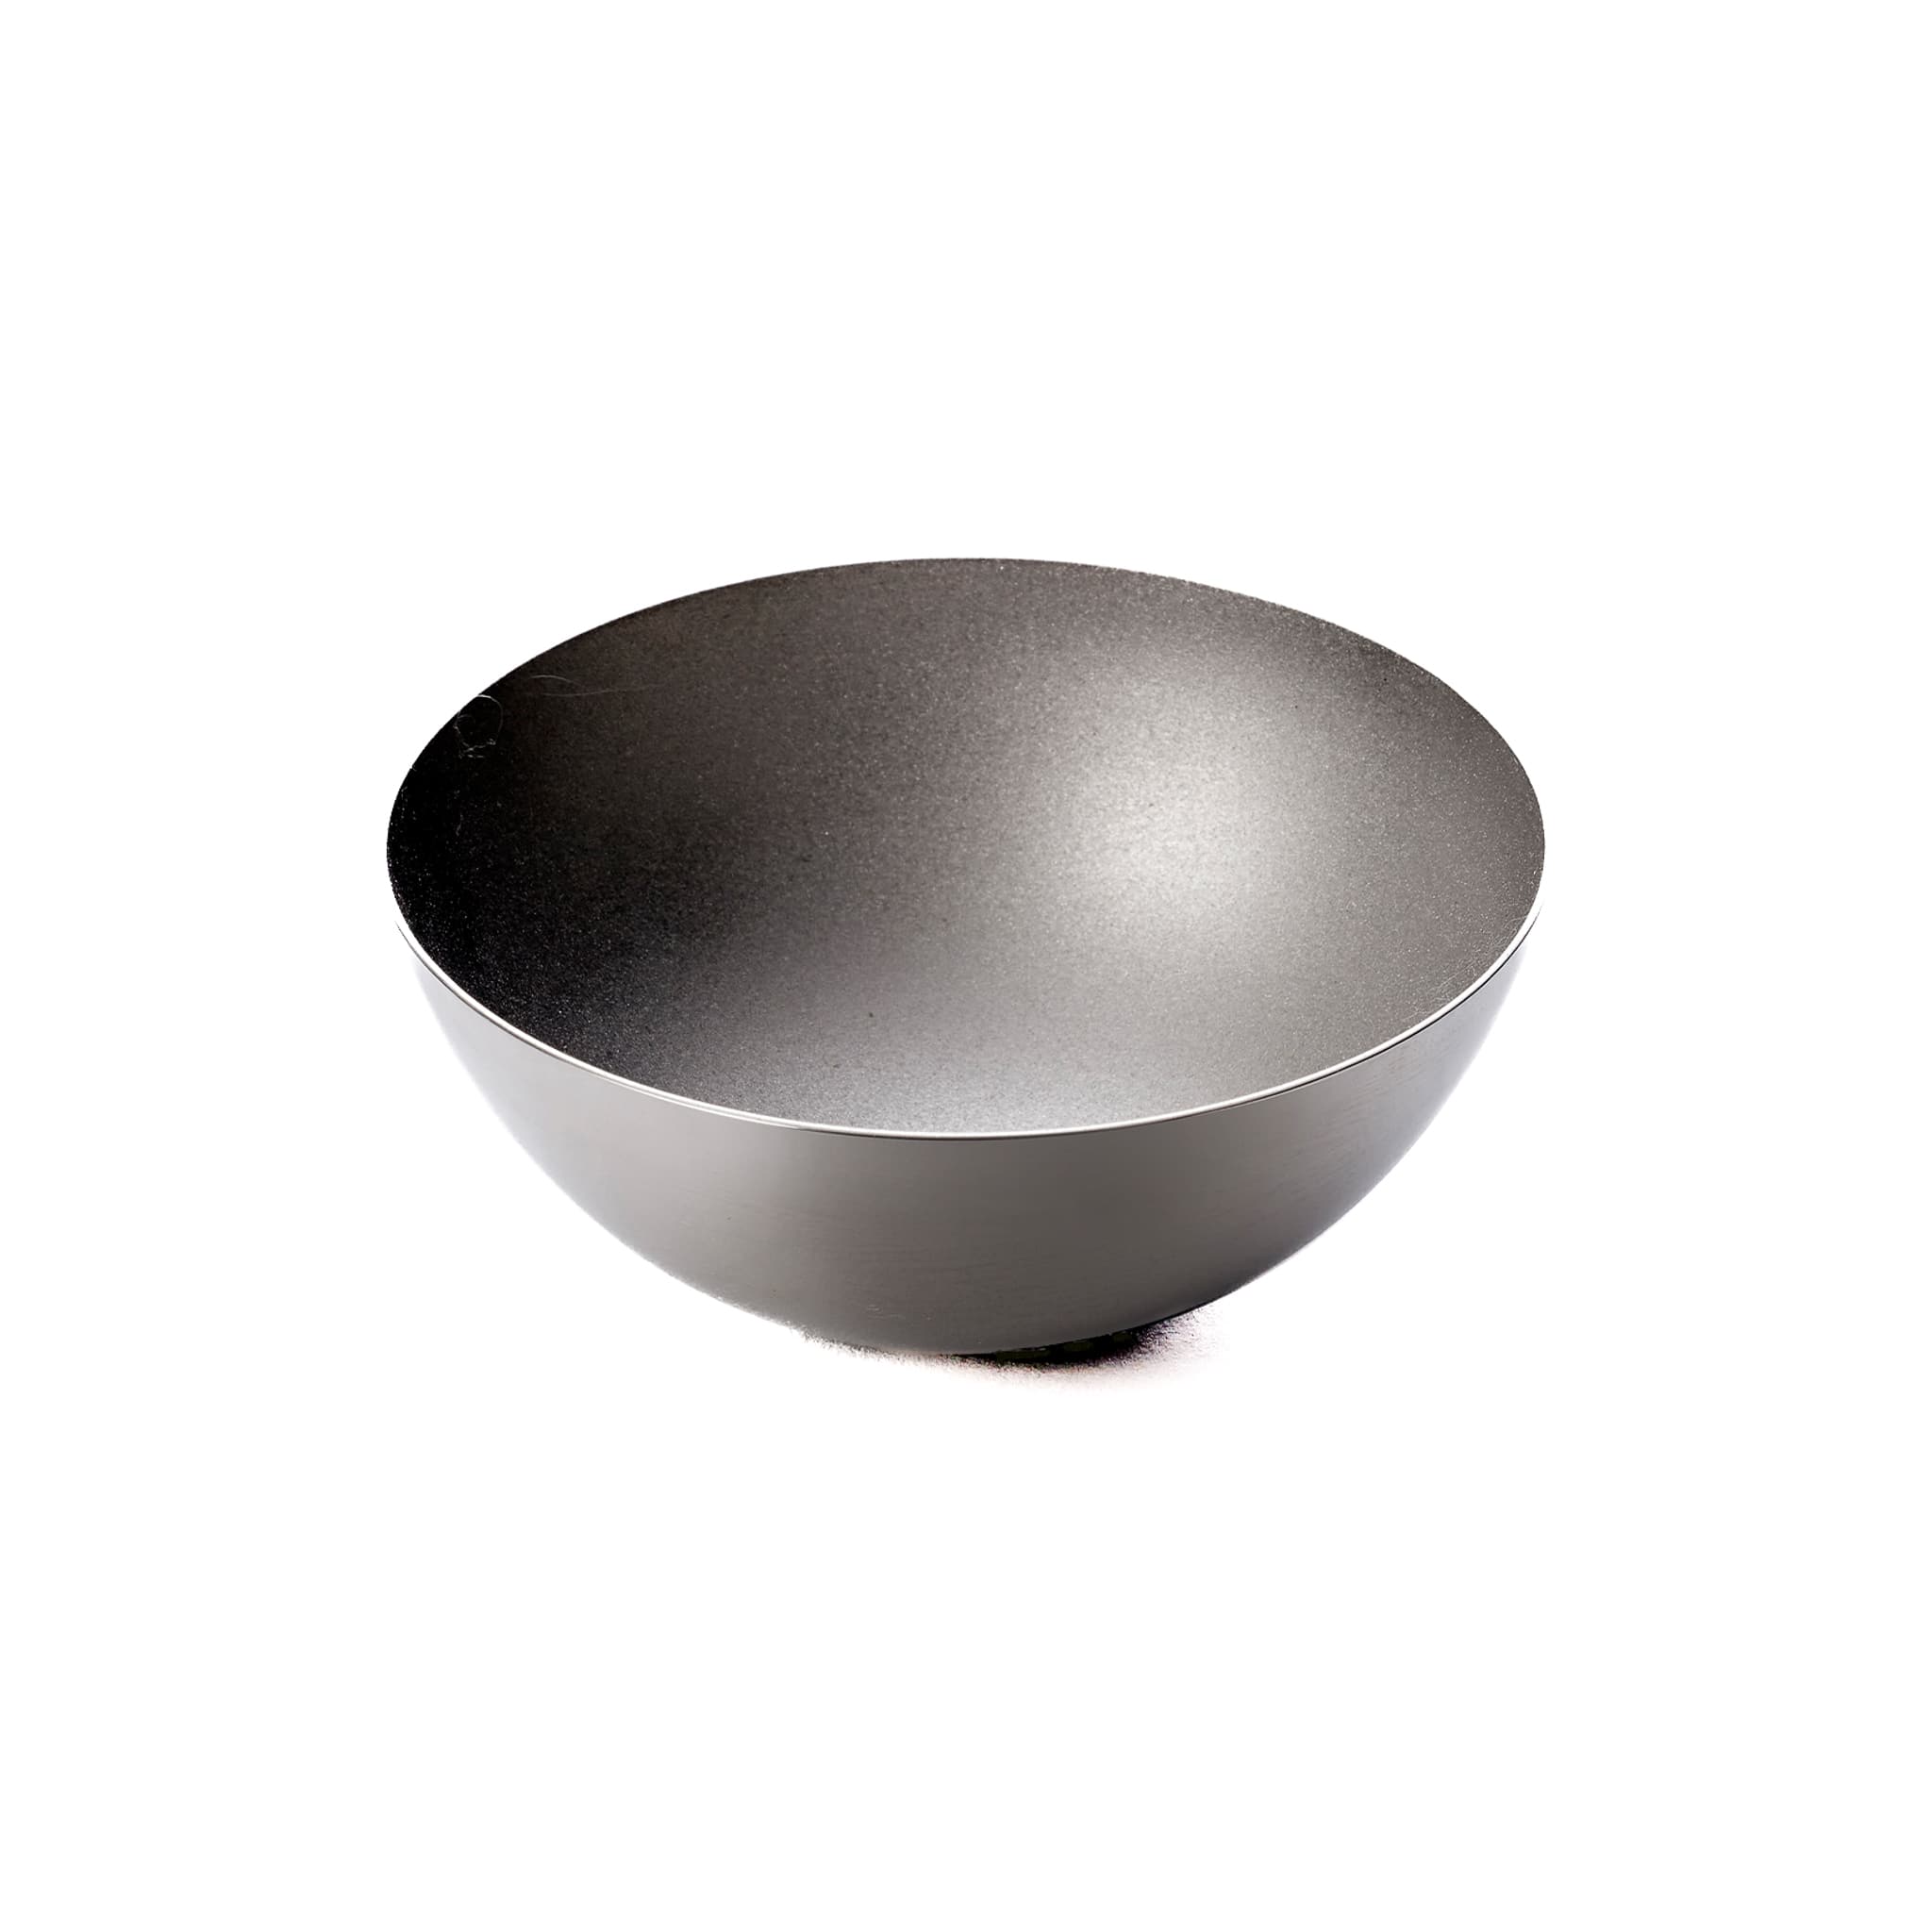 Japanese Stainless Steel Sulu Mortar & Pestle with Lid, 9cm